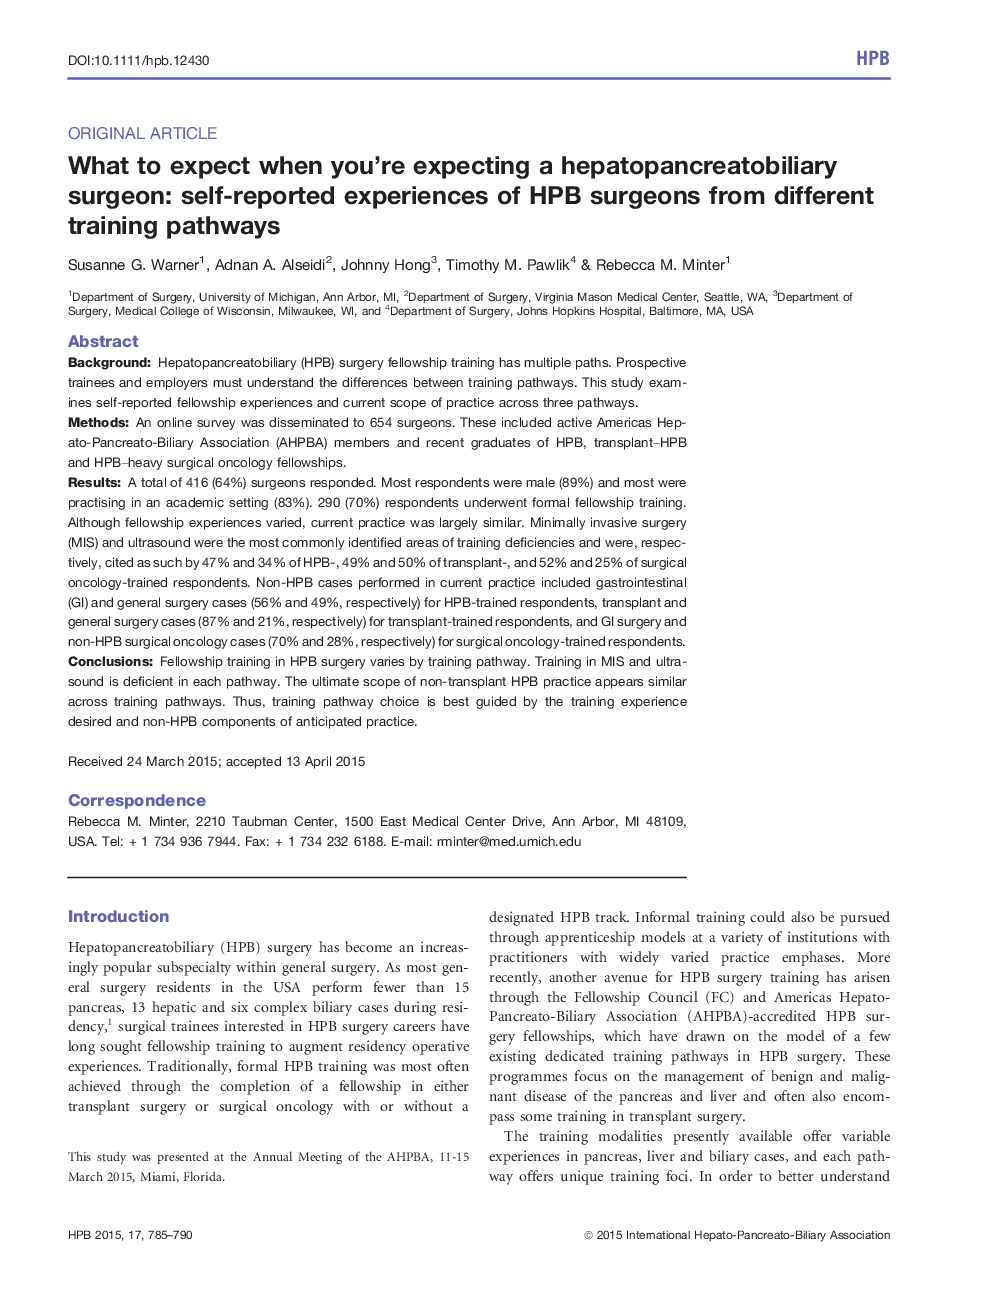 What to expect when you're expecting a hepatopancreatobiliary surgeon: self-reported experiences of HPB surgeons from different training pathways